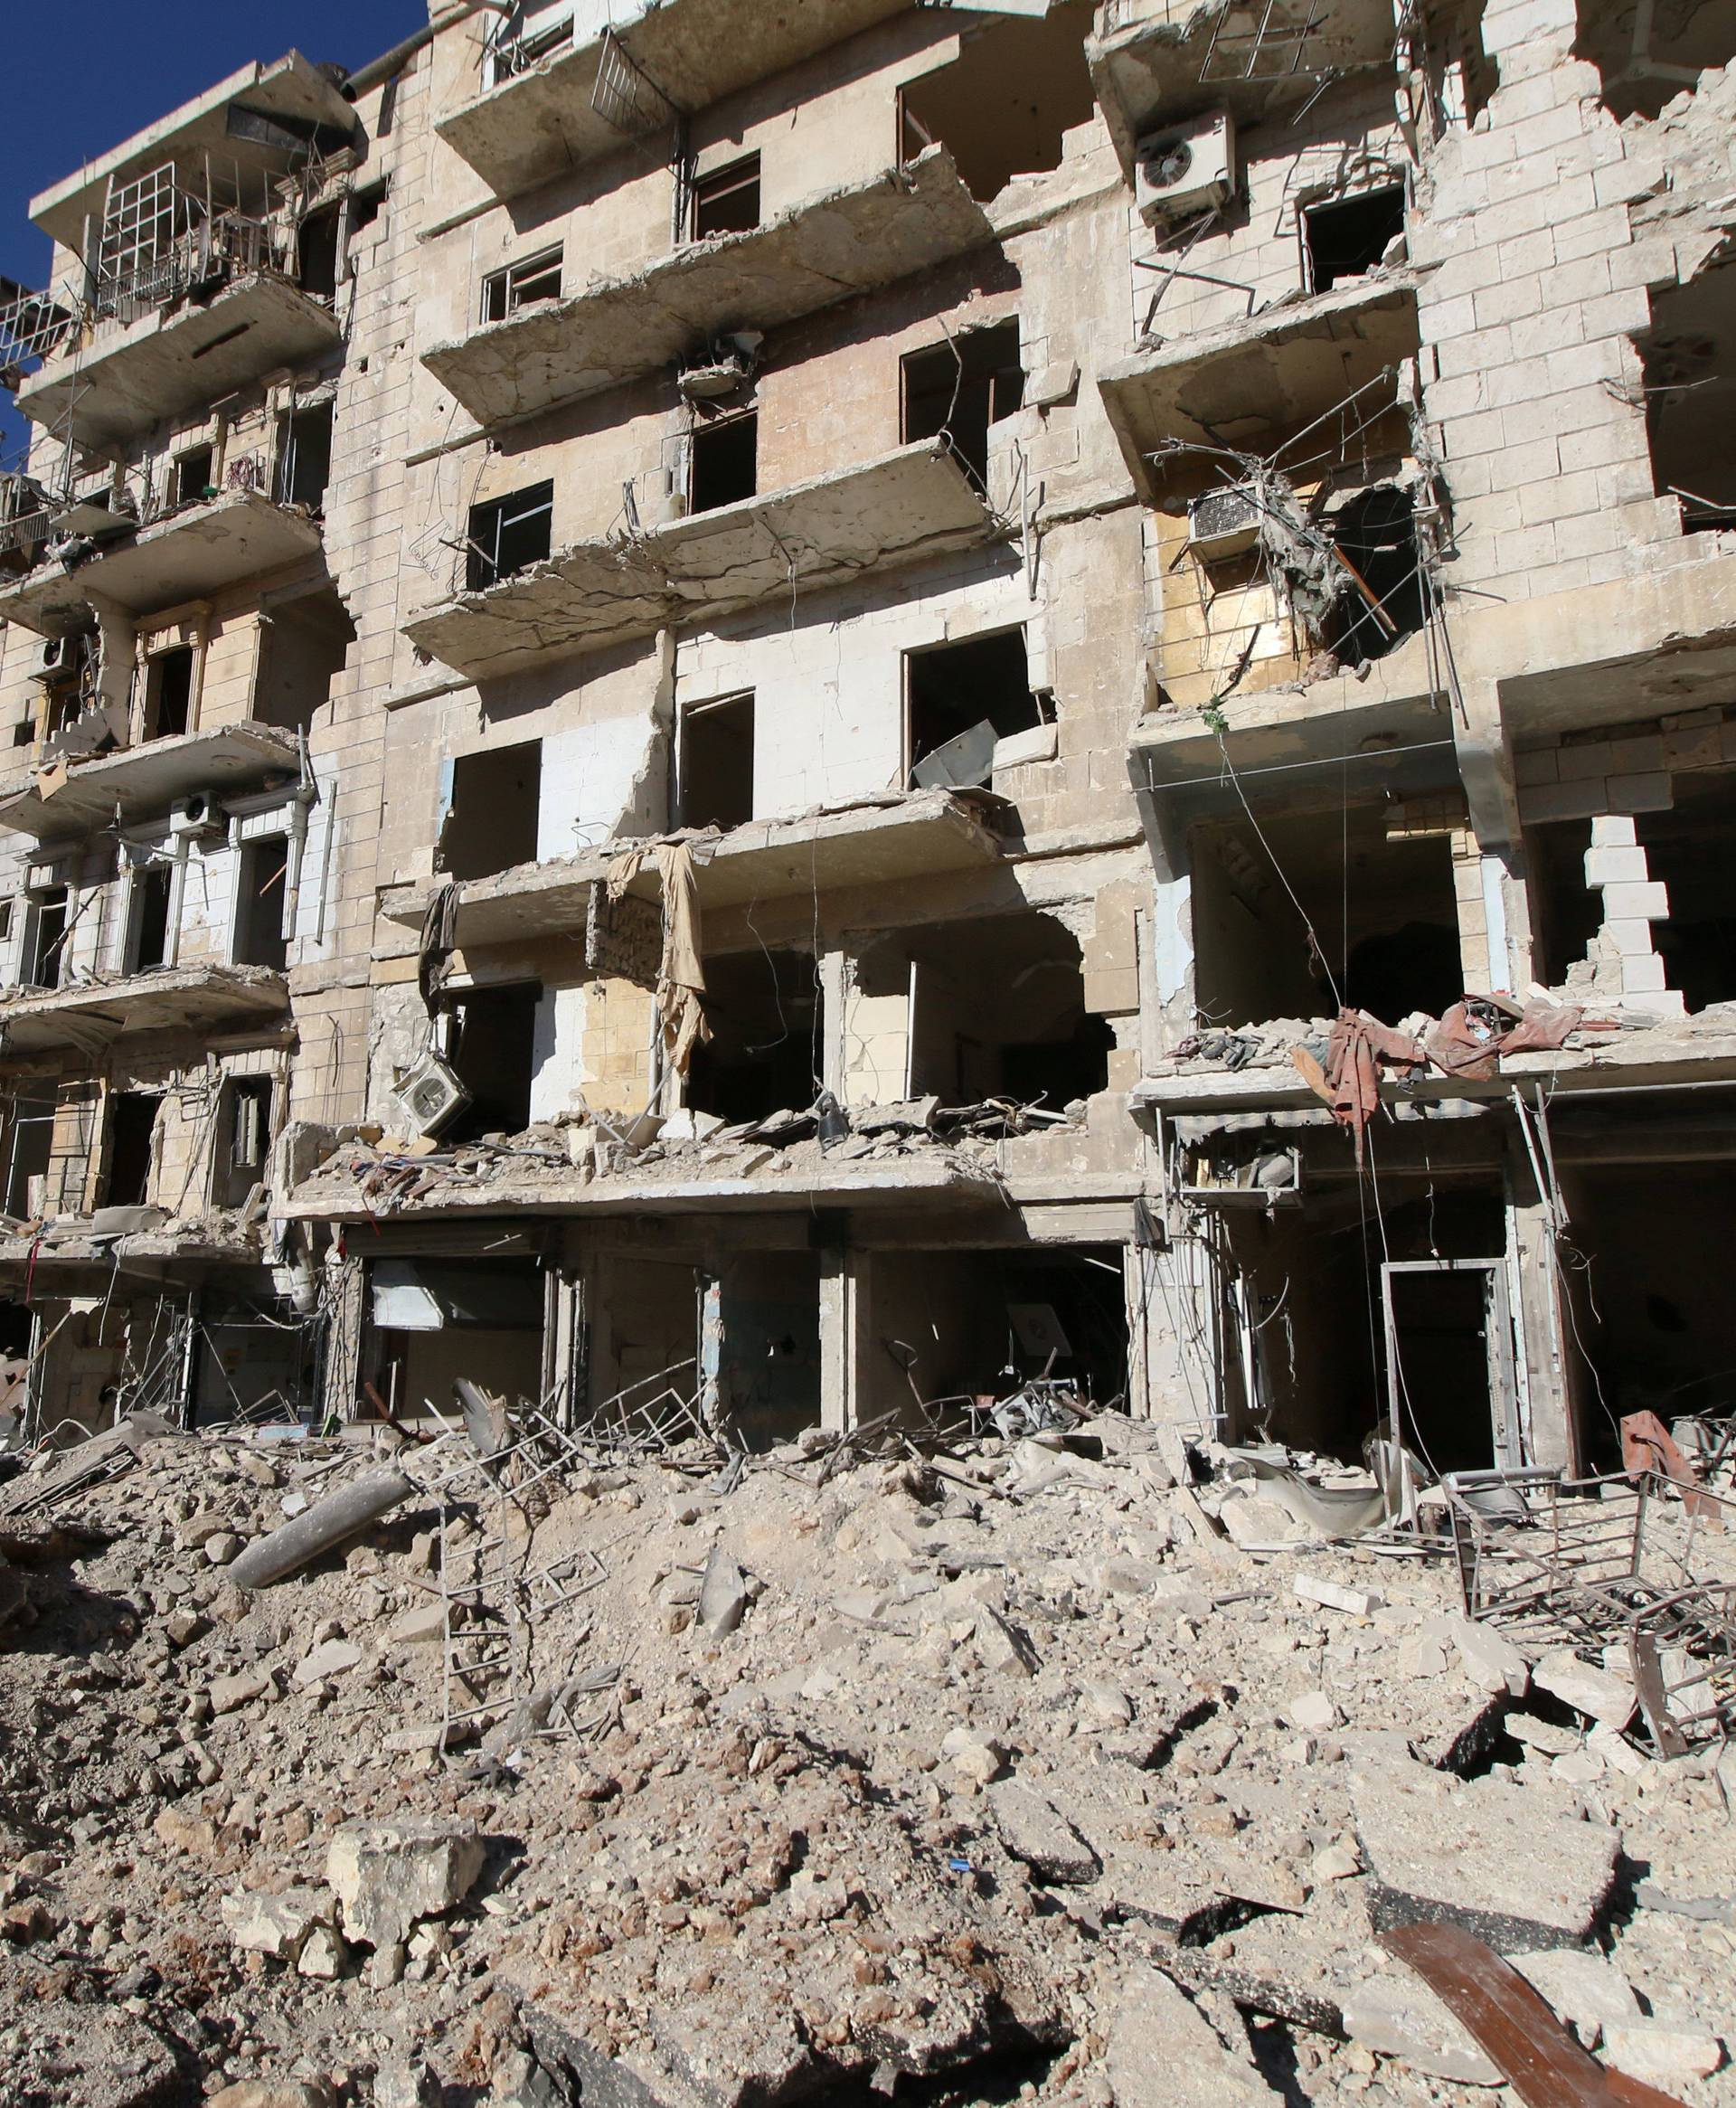 A general view shows the damage at a site hit by airstrikes in the rebel-held besieged al-Qaterji neighbourhood of Aleppo